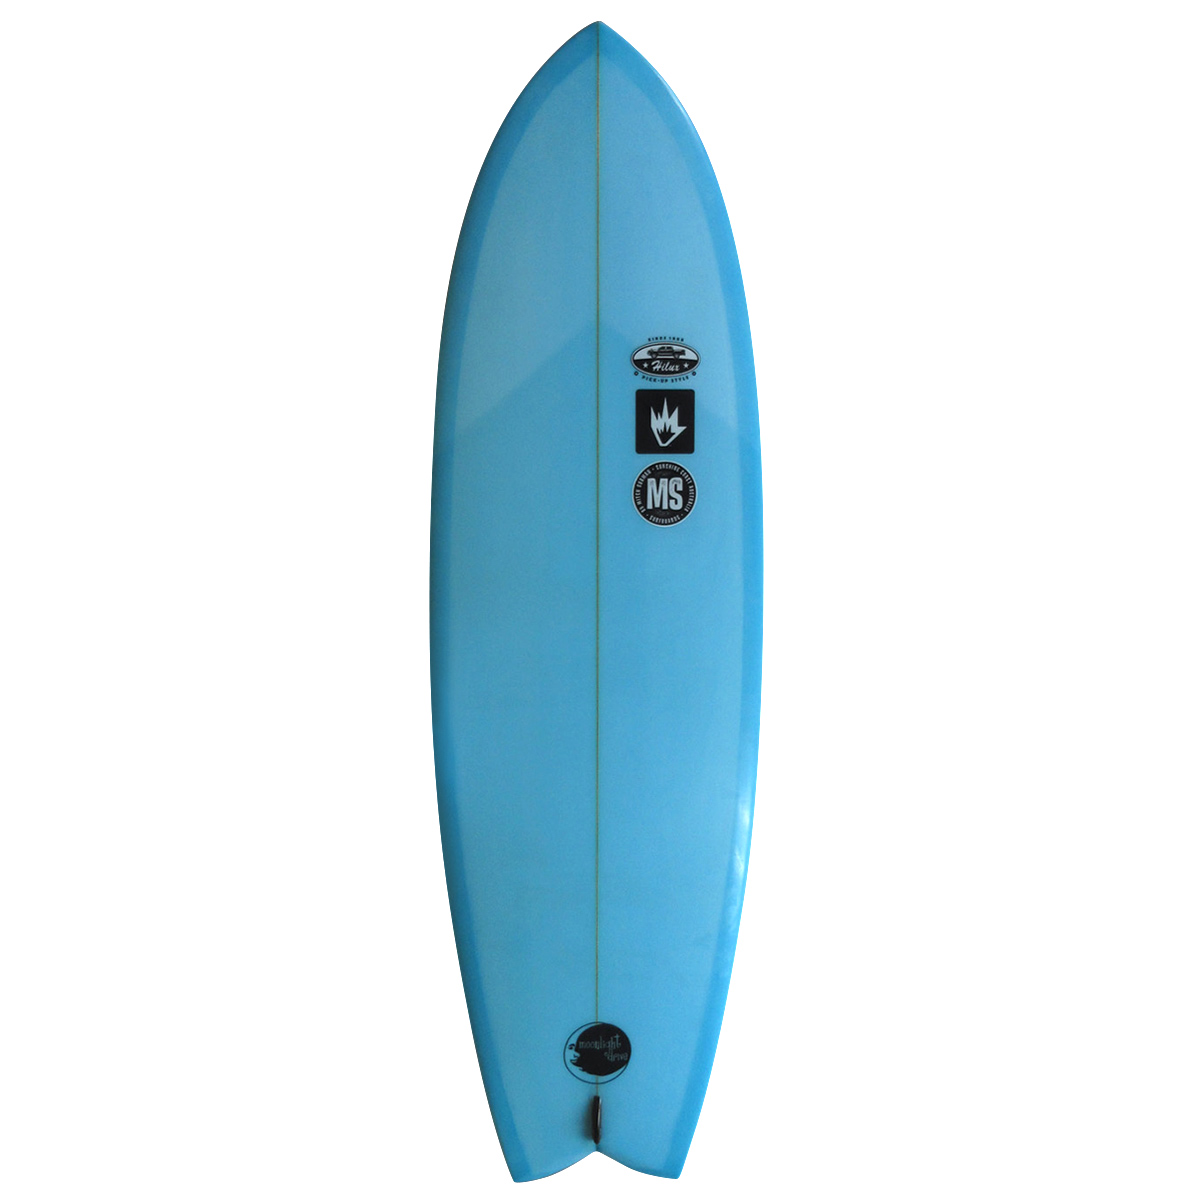 MS Surfboards / Moonlight Drive 5'10 Limited Edition x Afends x Hilux